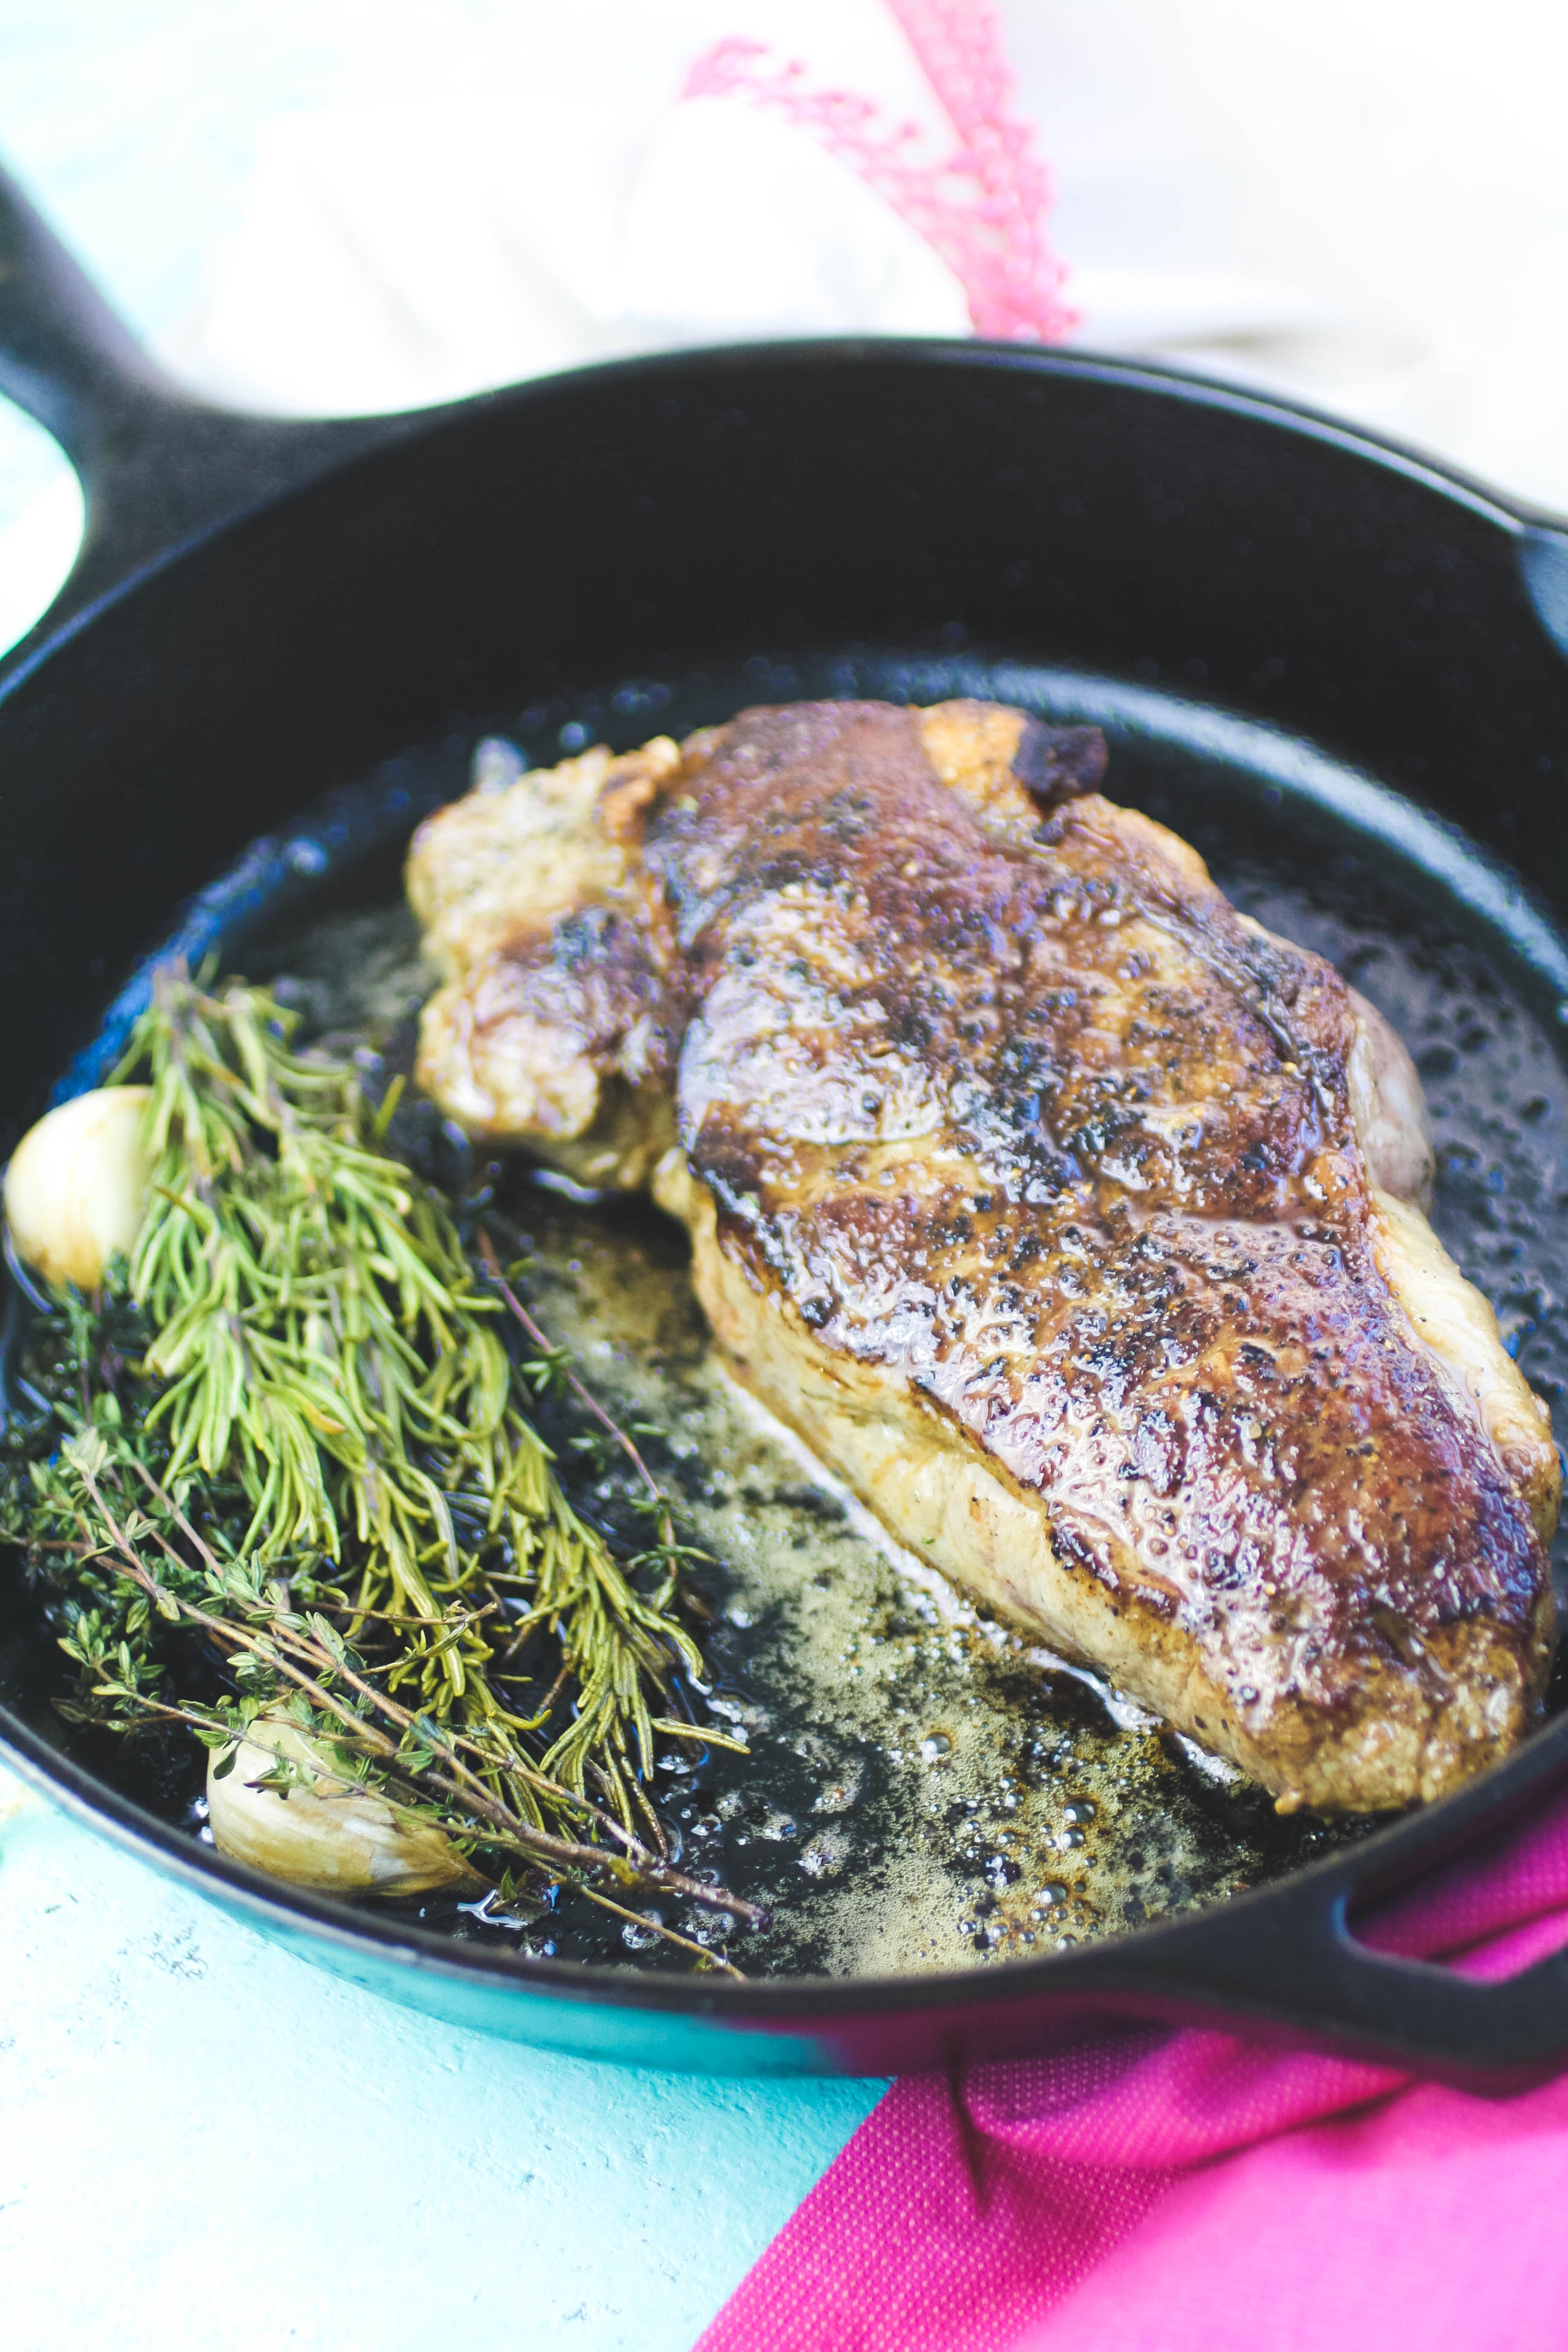 Skillet-Cooked NY Strip Steak with Chimichurri Sauce is easy to make and perfect for a special meal. Skillet-Cooked NY Strip Steak with Chimichurri Sauce is colorful and flavorful for your next meal.